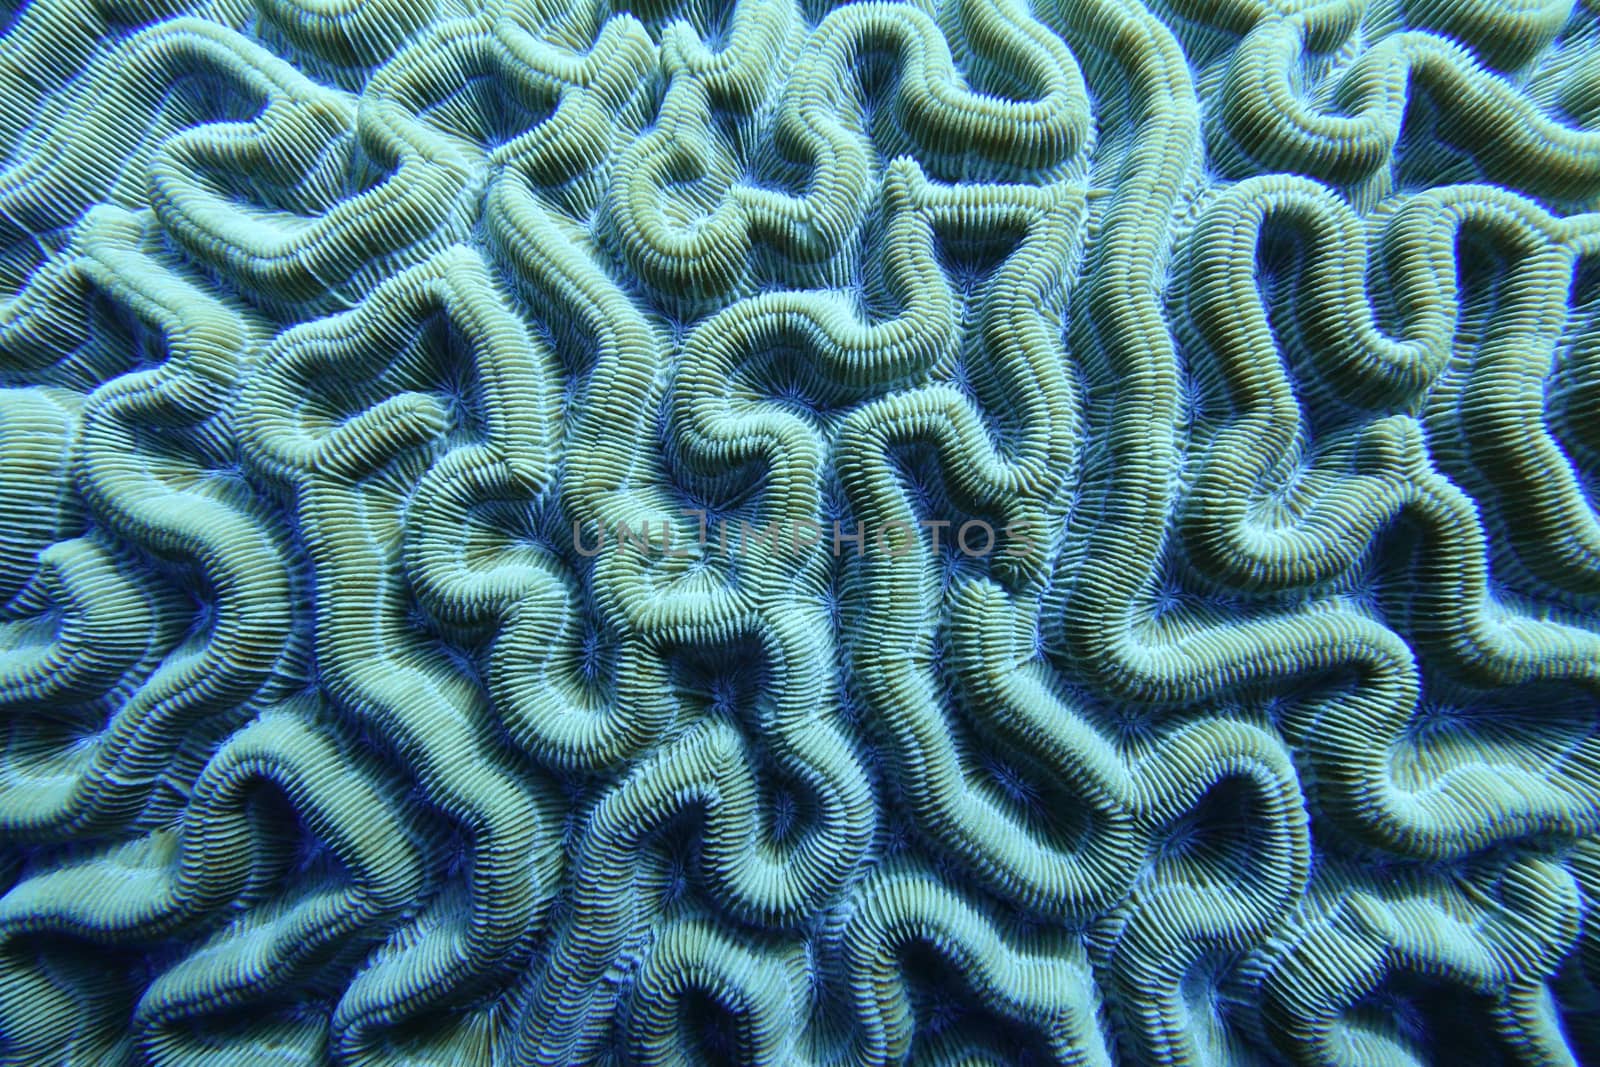 An underwater photo of coral. by Jshanebutt